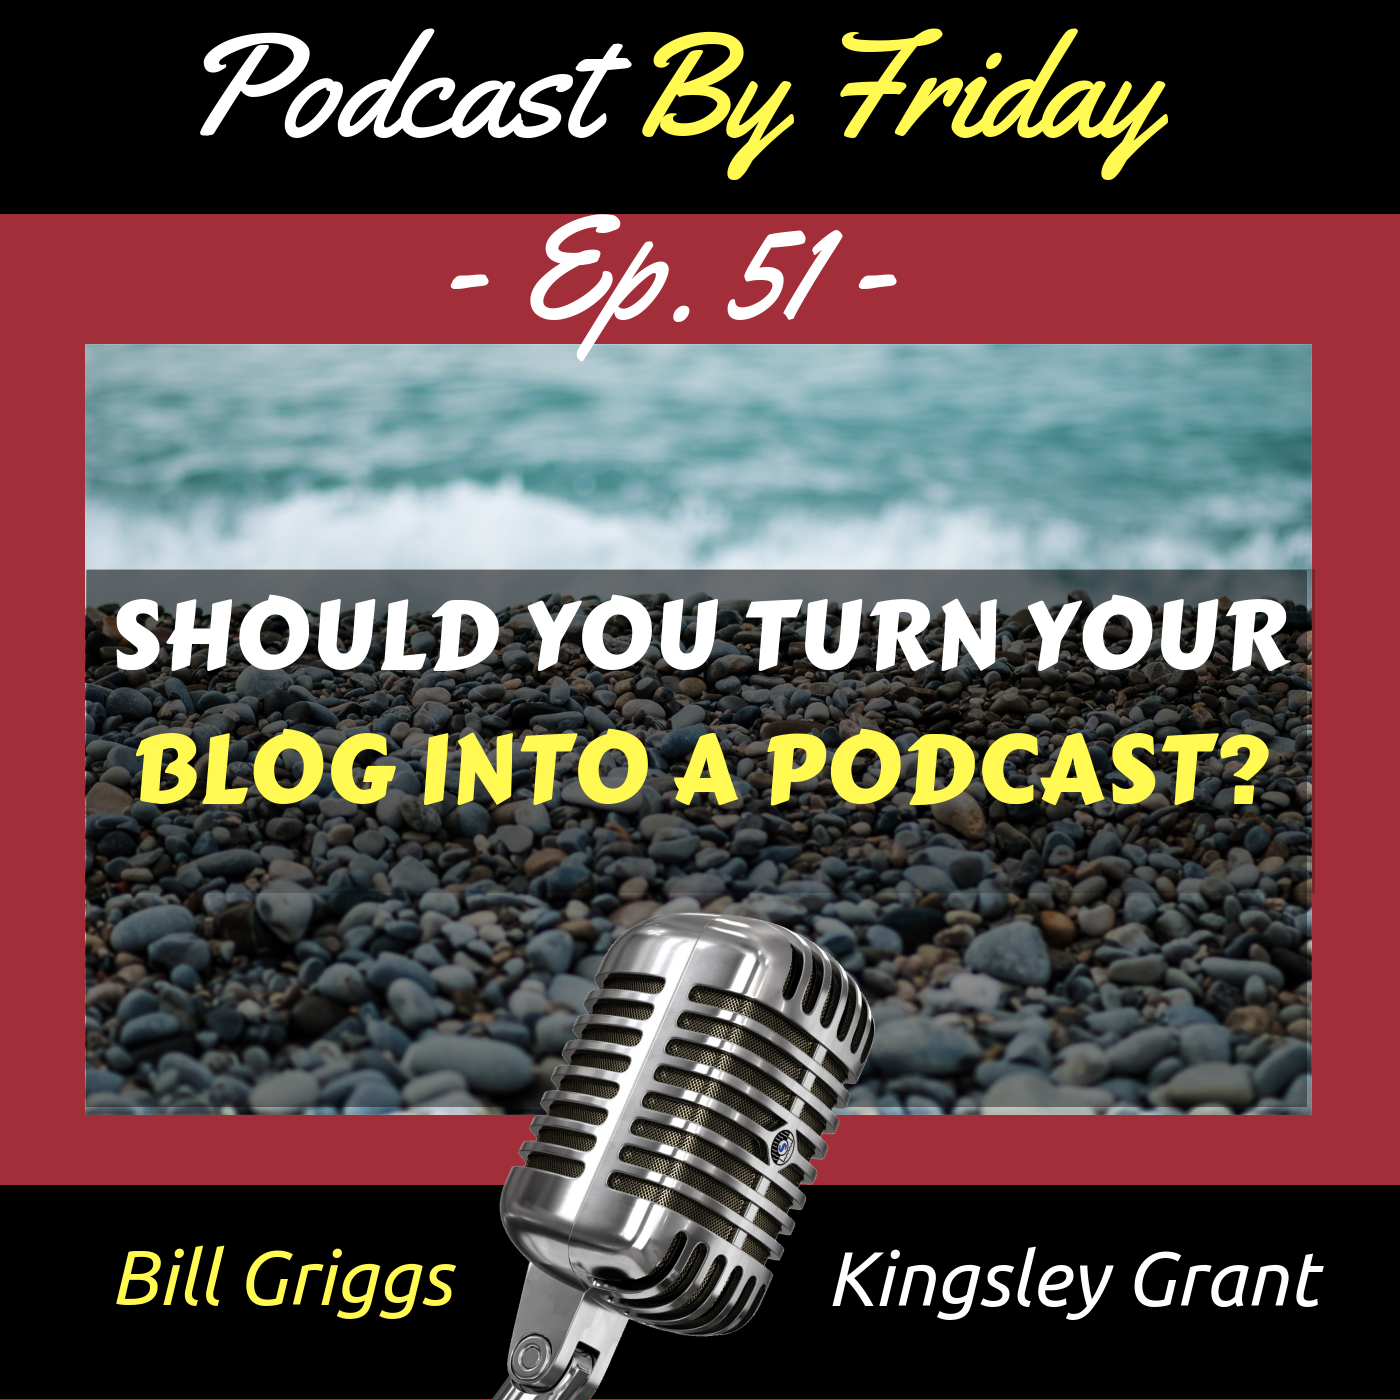 should you turn your blog into a podcast